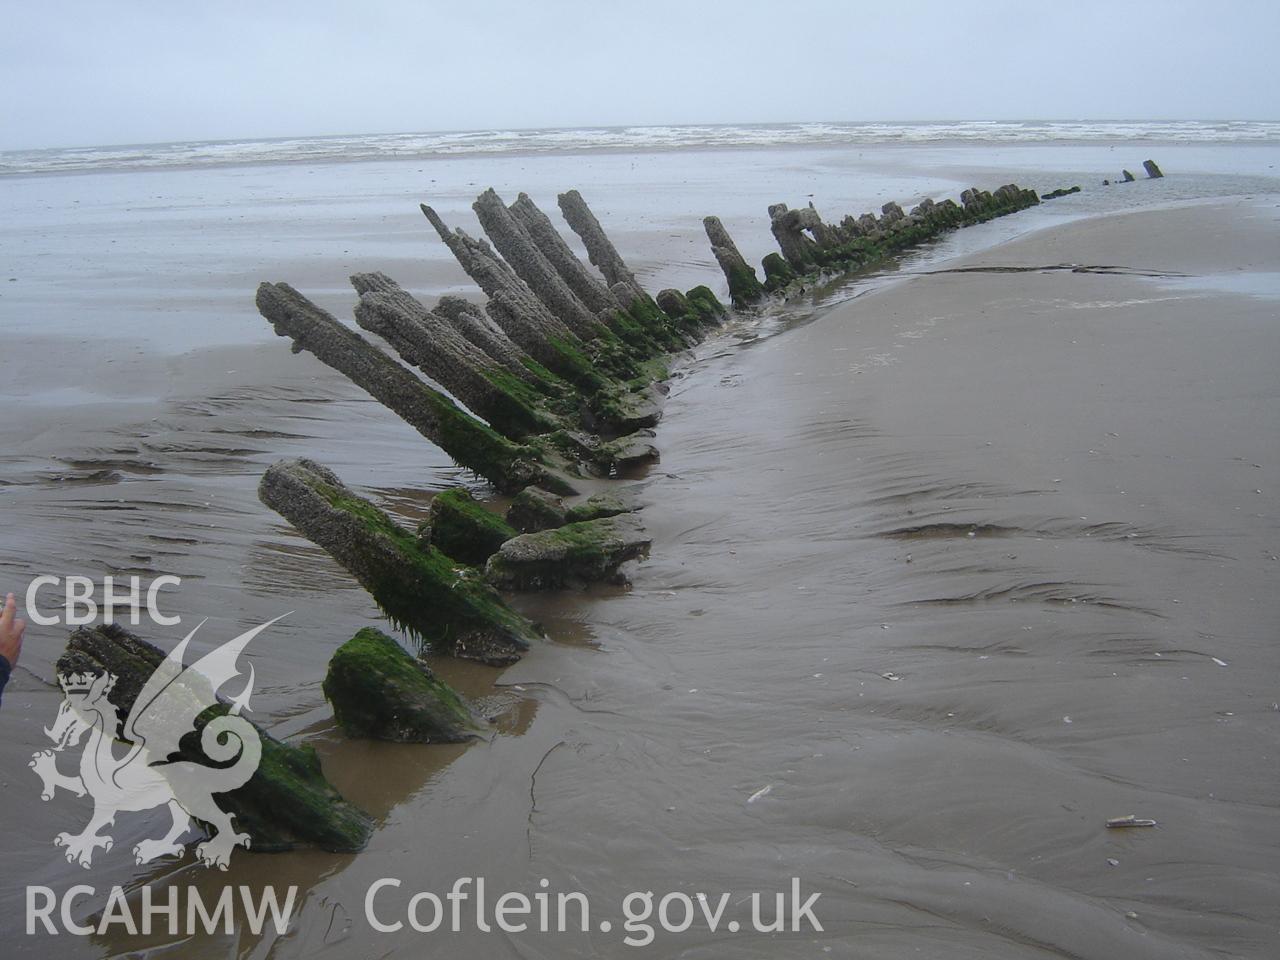 Digital photo showing unnamed wreck at Cefn Sidan, produced by Ian Cundy, July 2010.